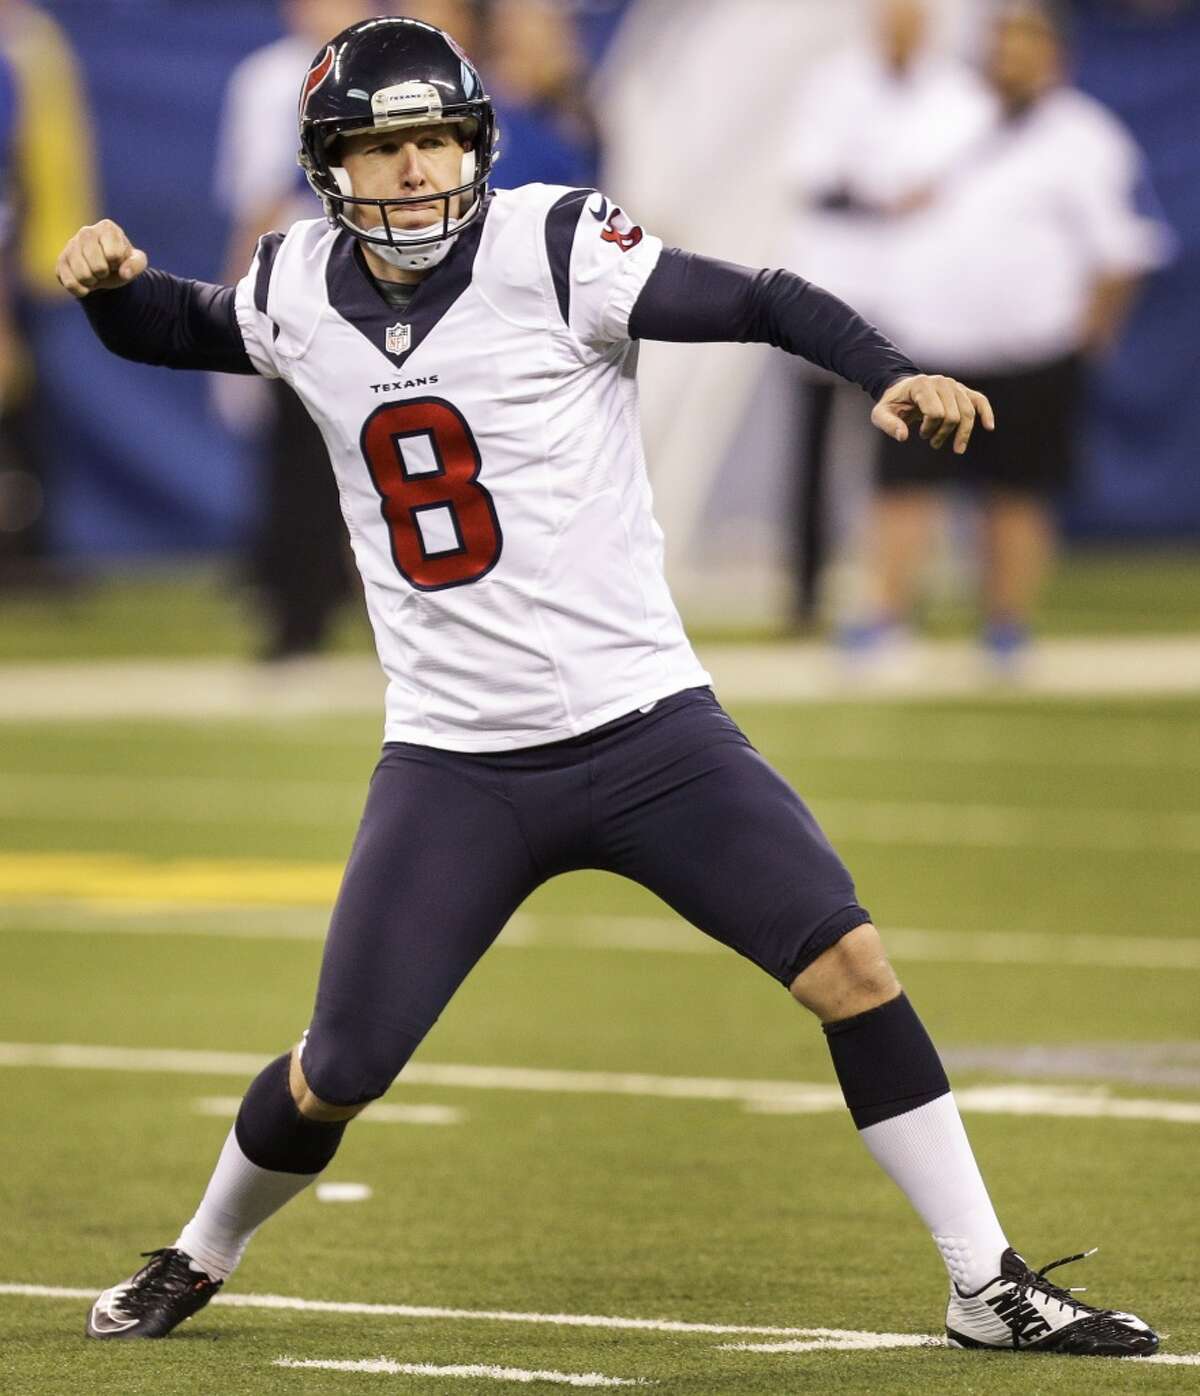 29. Nick Novak, kicker After replacing Randy Bullock, he was 18-of-21 on field goals. Every miss was from 50 and beyond. He missed two extra points, though. He had touchbacks on a career-best 37 percent of his kickoffs.